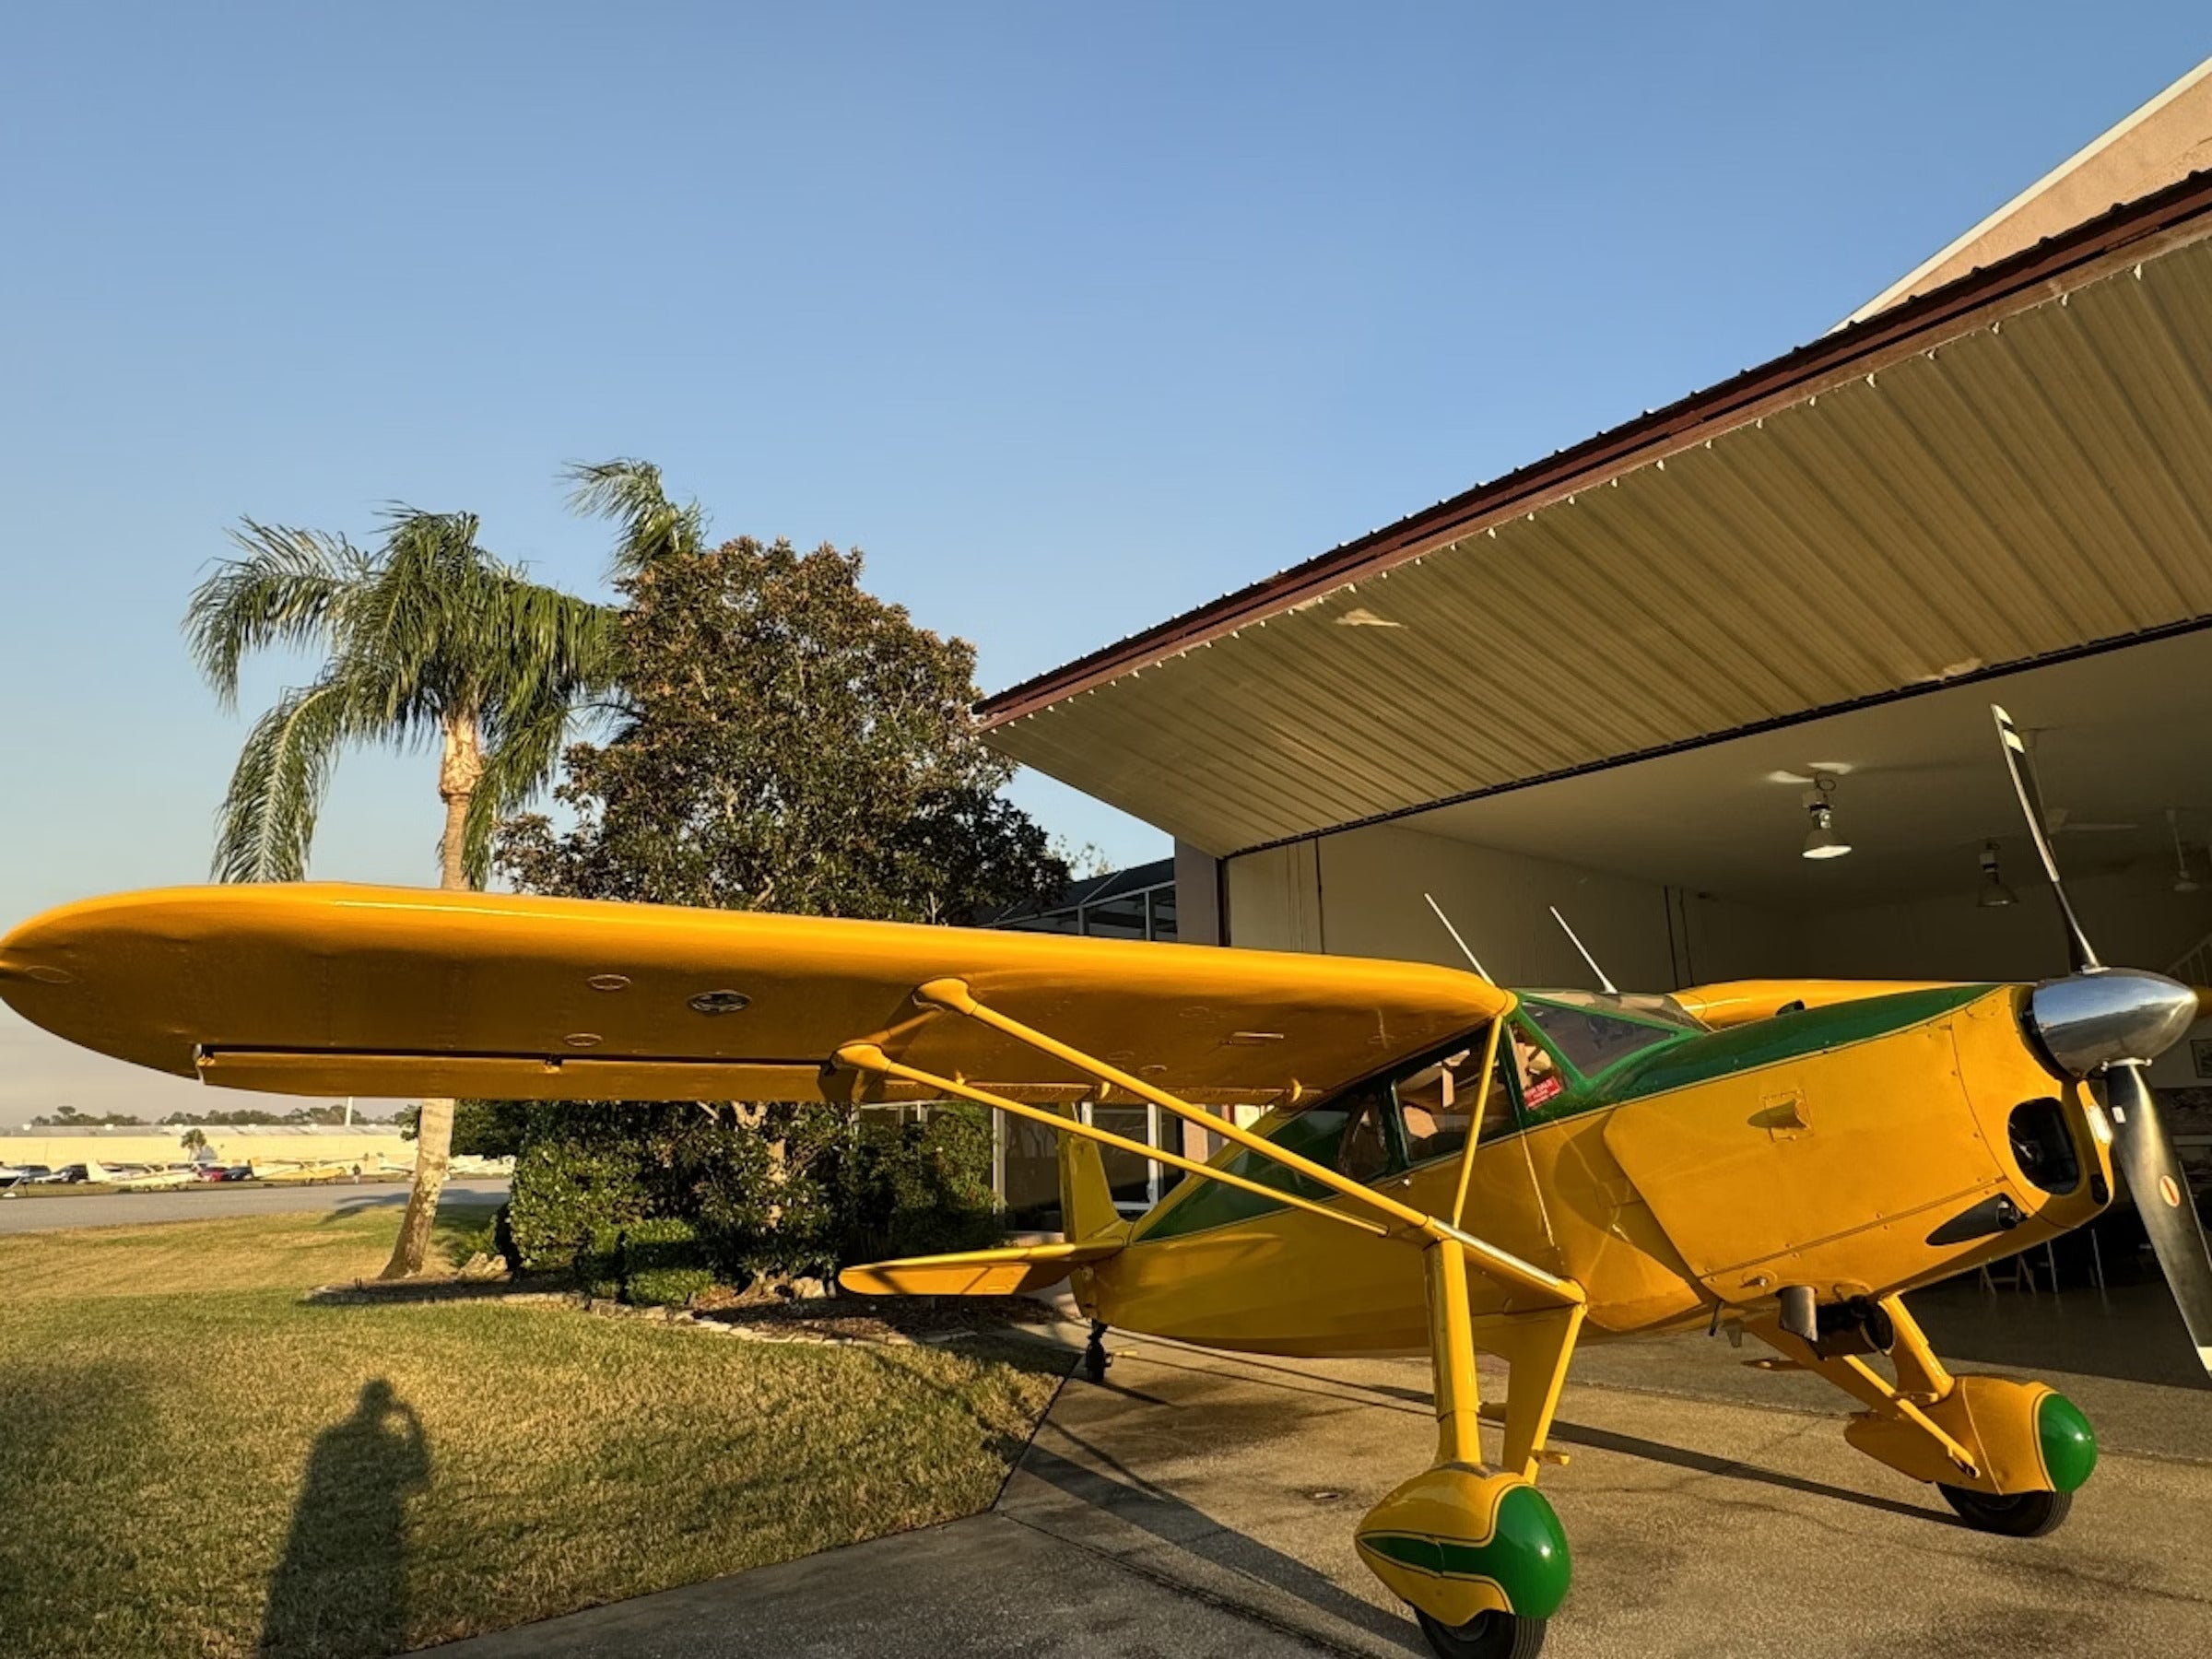 This 1937 Fairchild F-24 H Is a Practical Antique and ‘AircraftForSale’ Top Pick